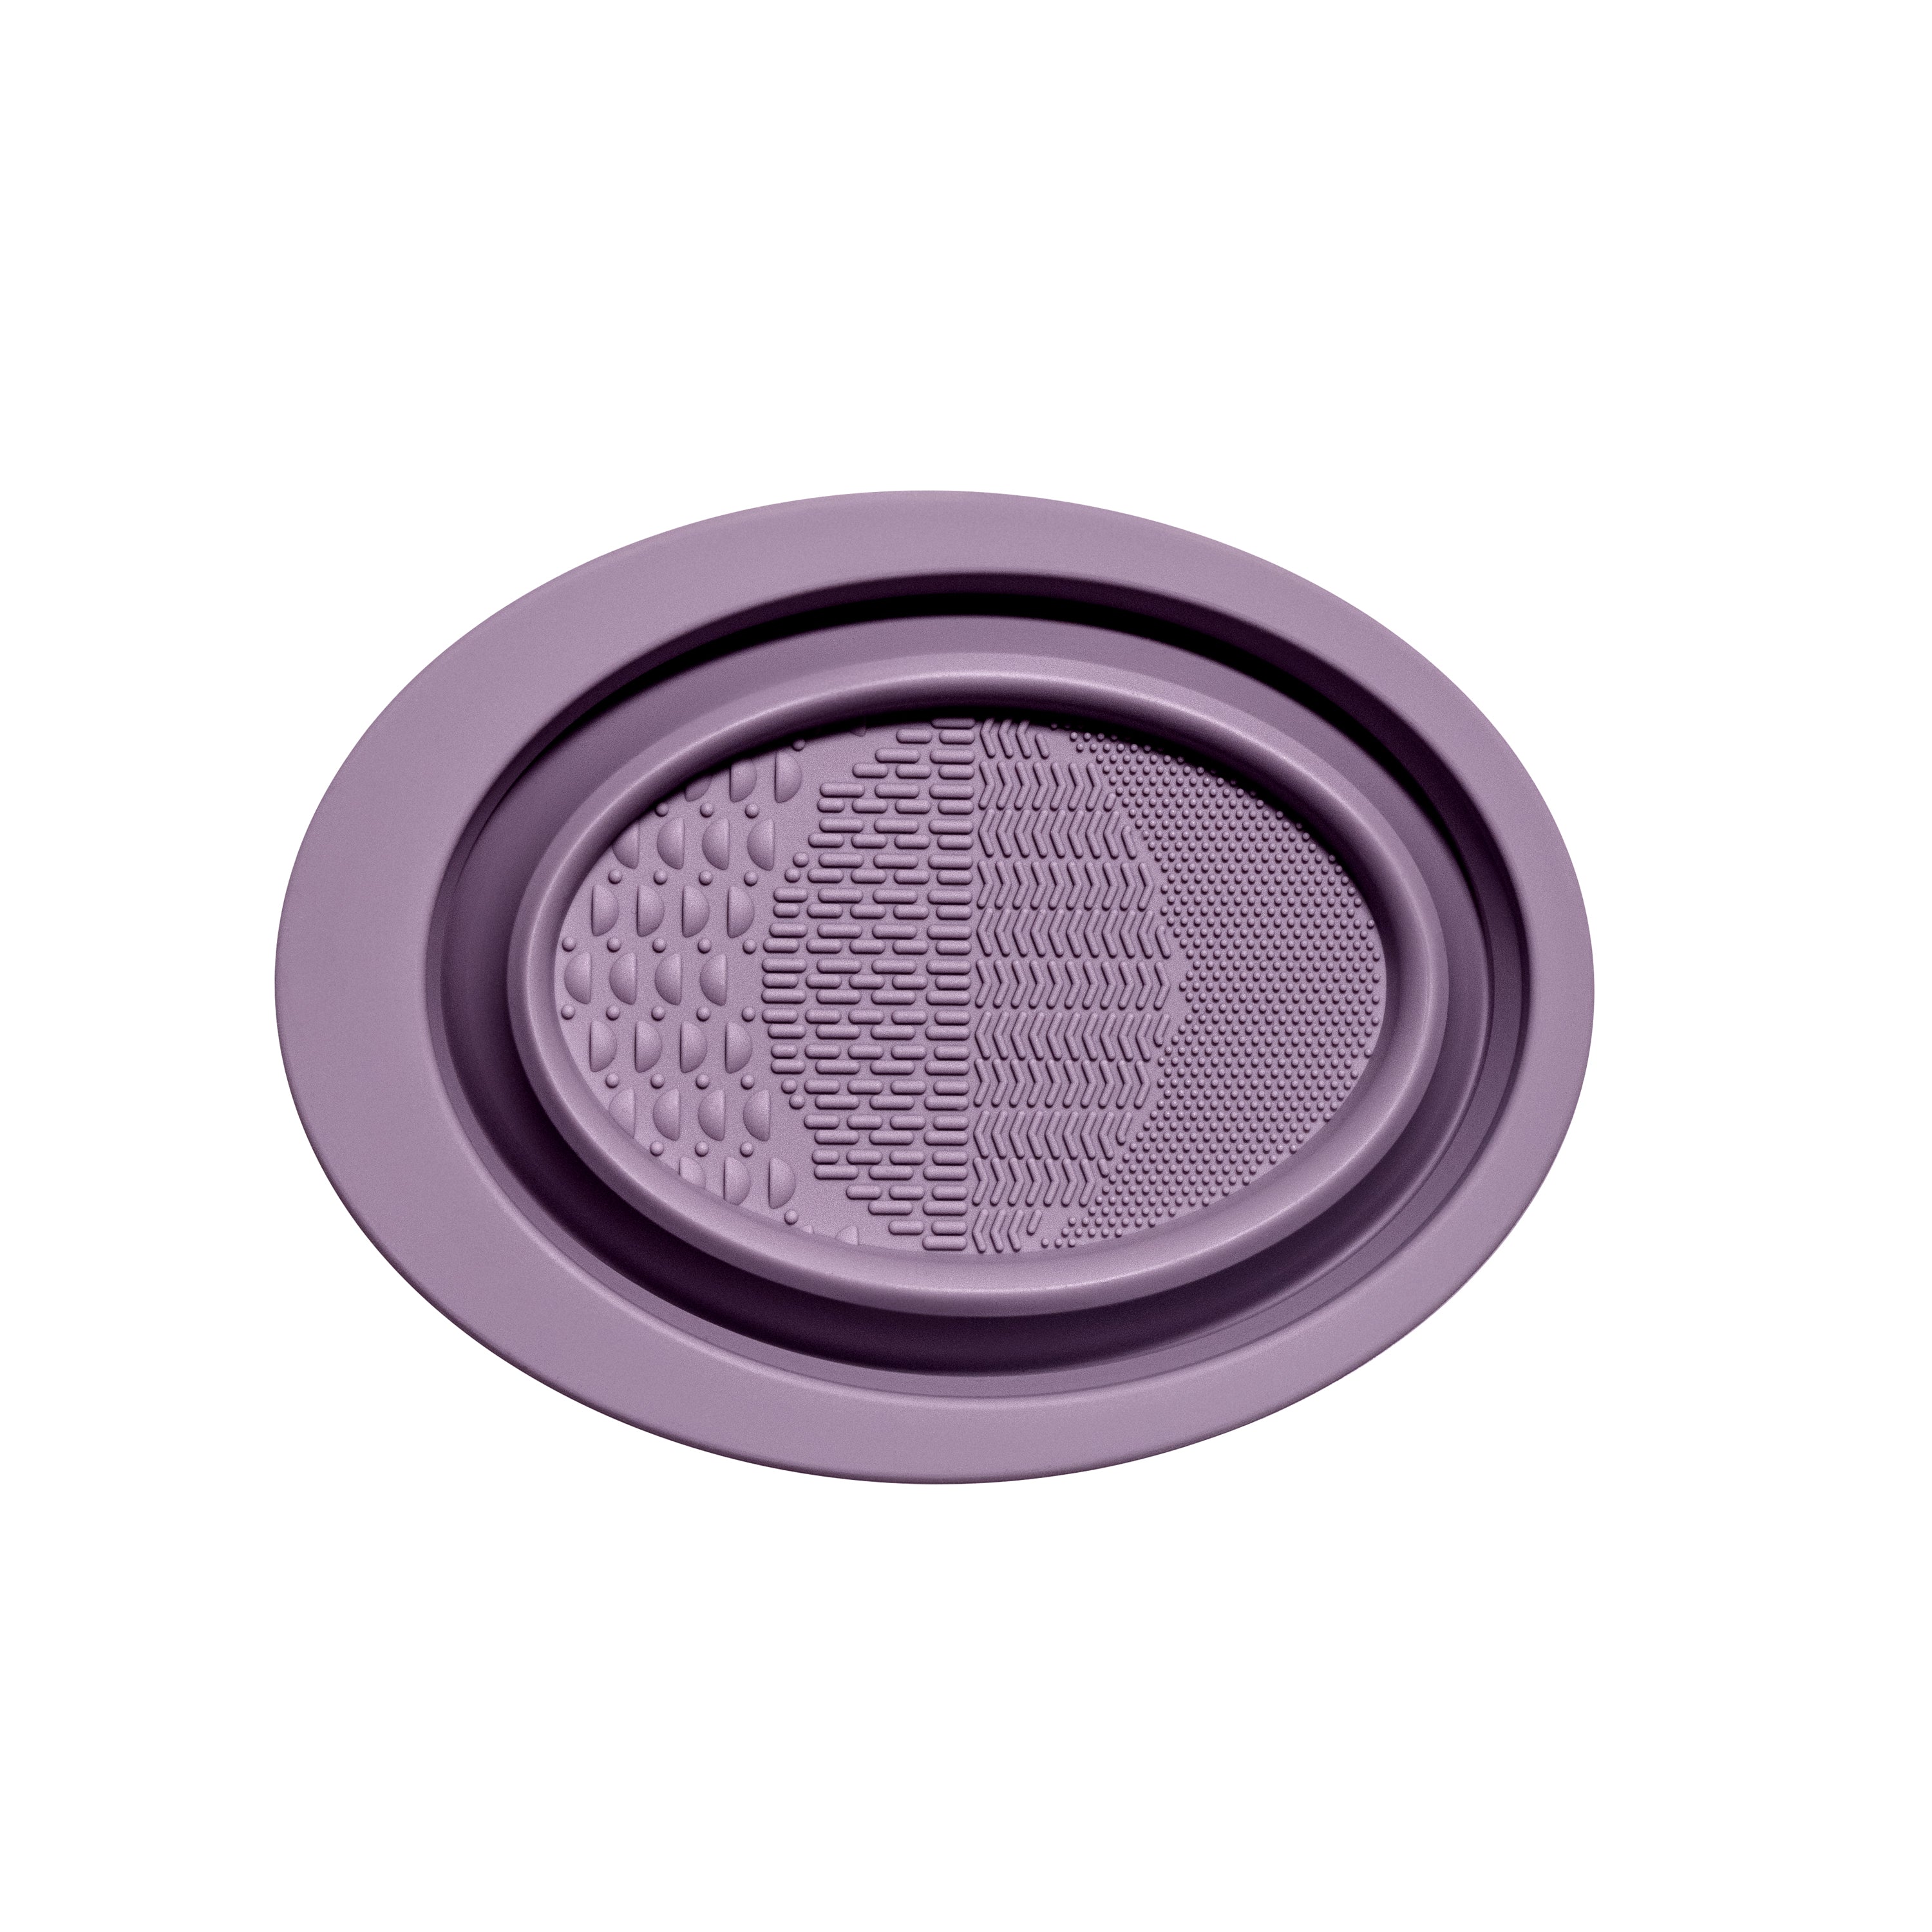 Brush Cleaning Pad Lavender